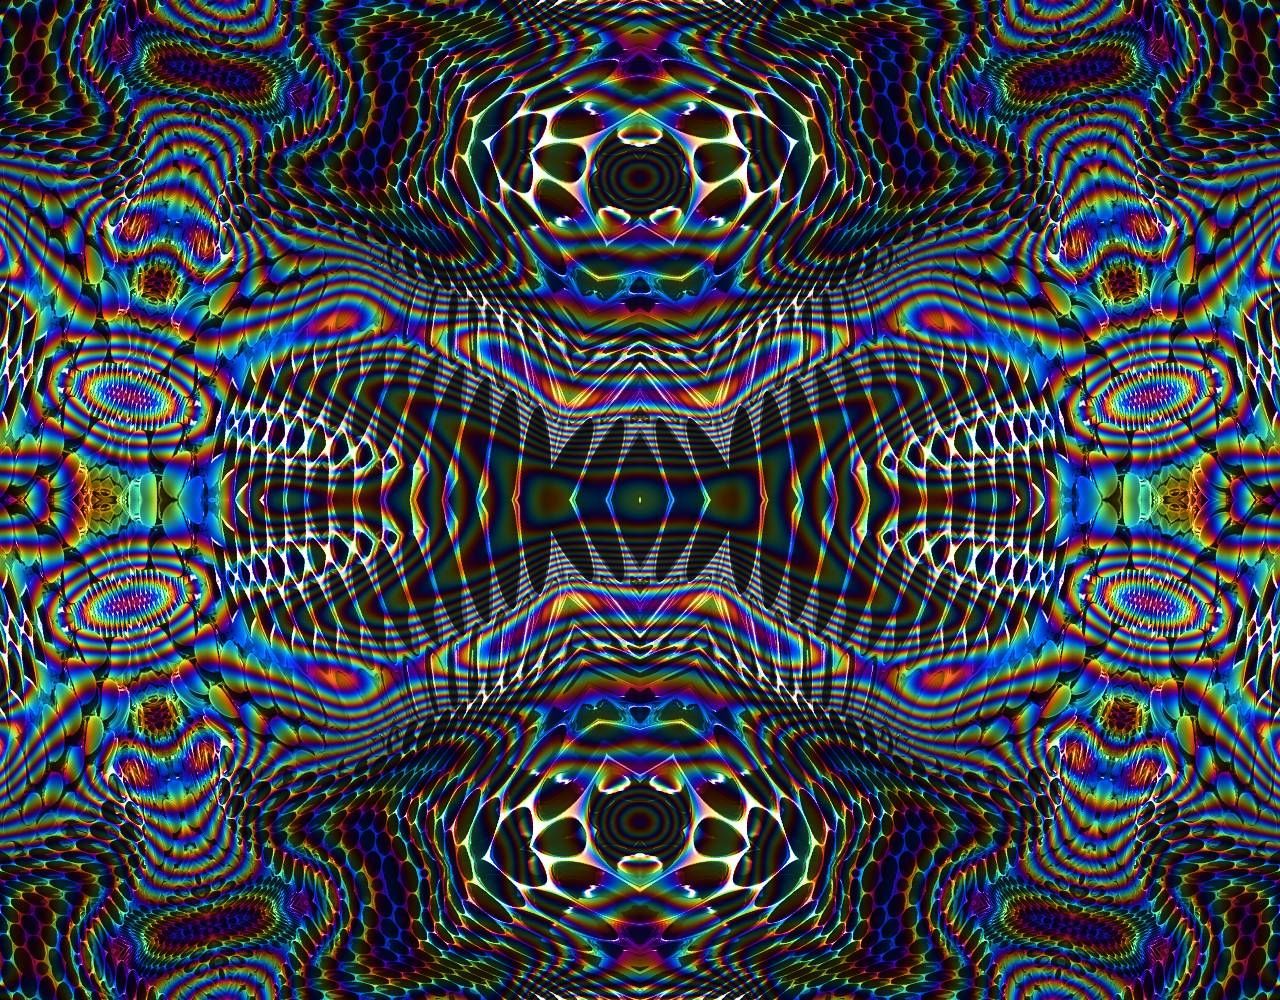 ☽ ☾. Trippy wallpaper, Psychedelic art, Tumblr background